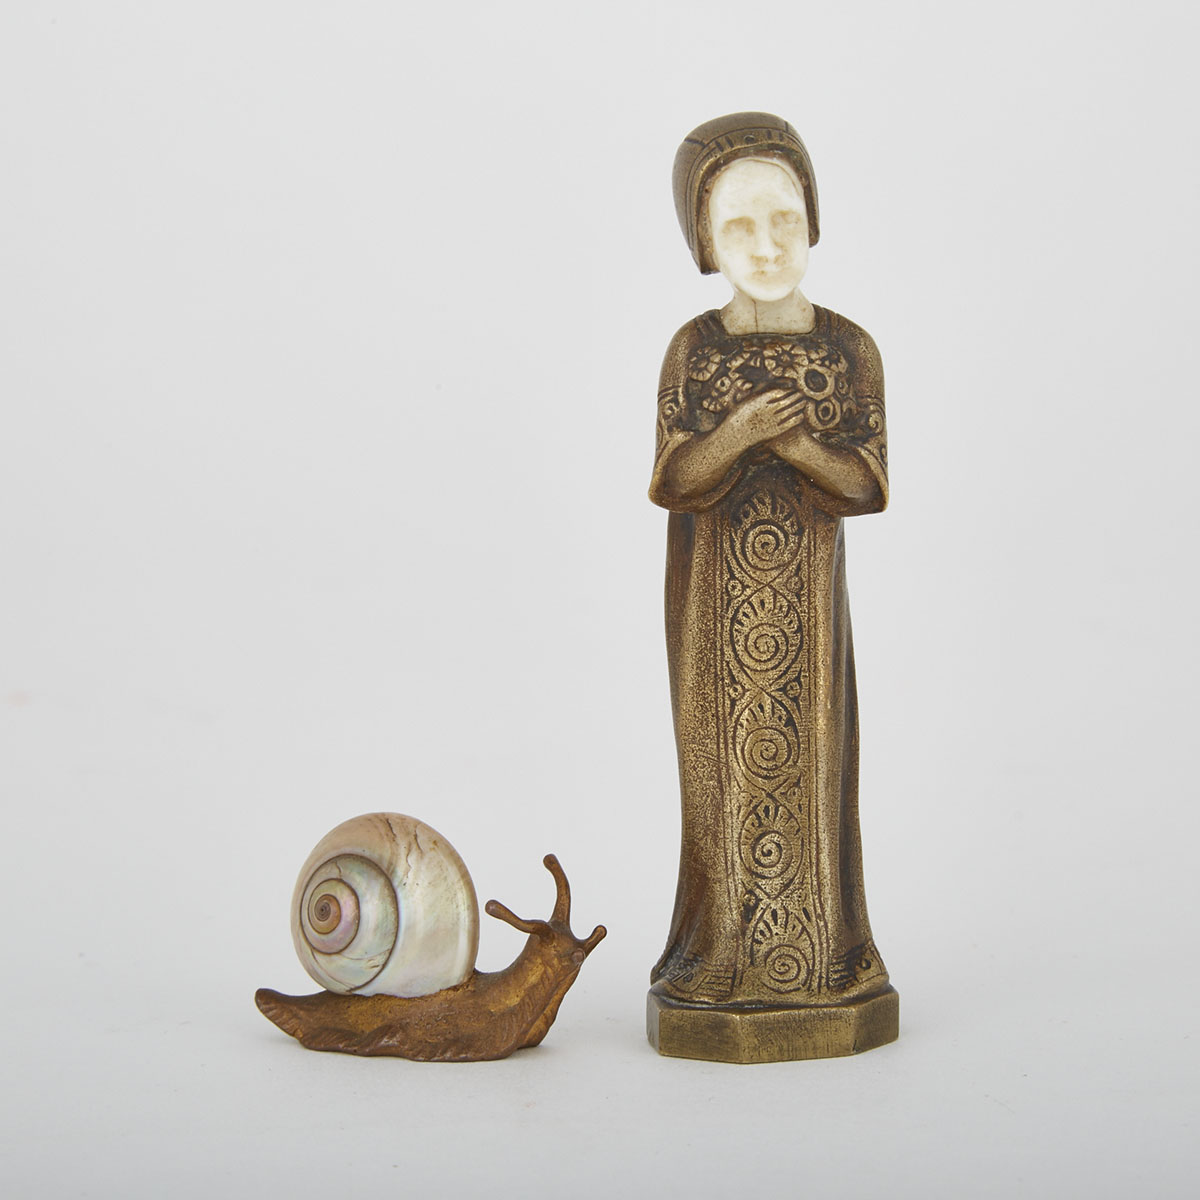 Two Small Austrian Bronzes, early 20th century